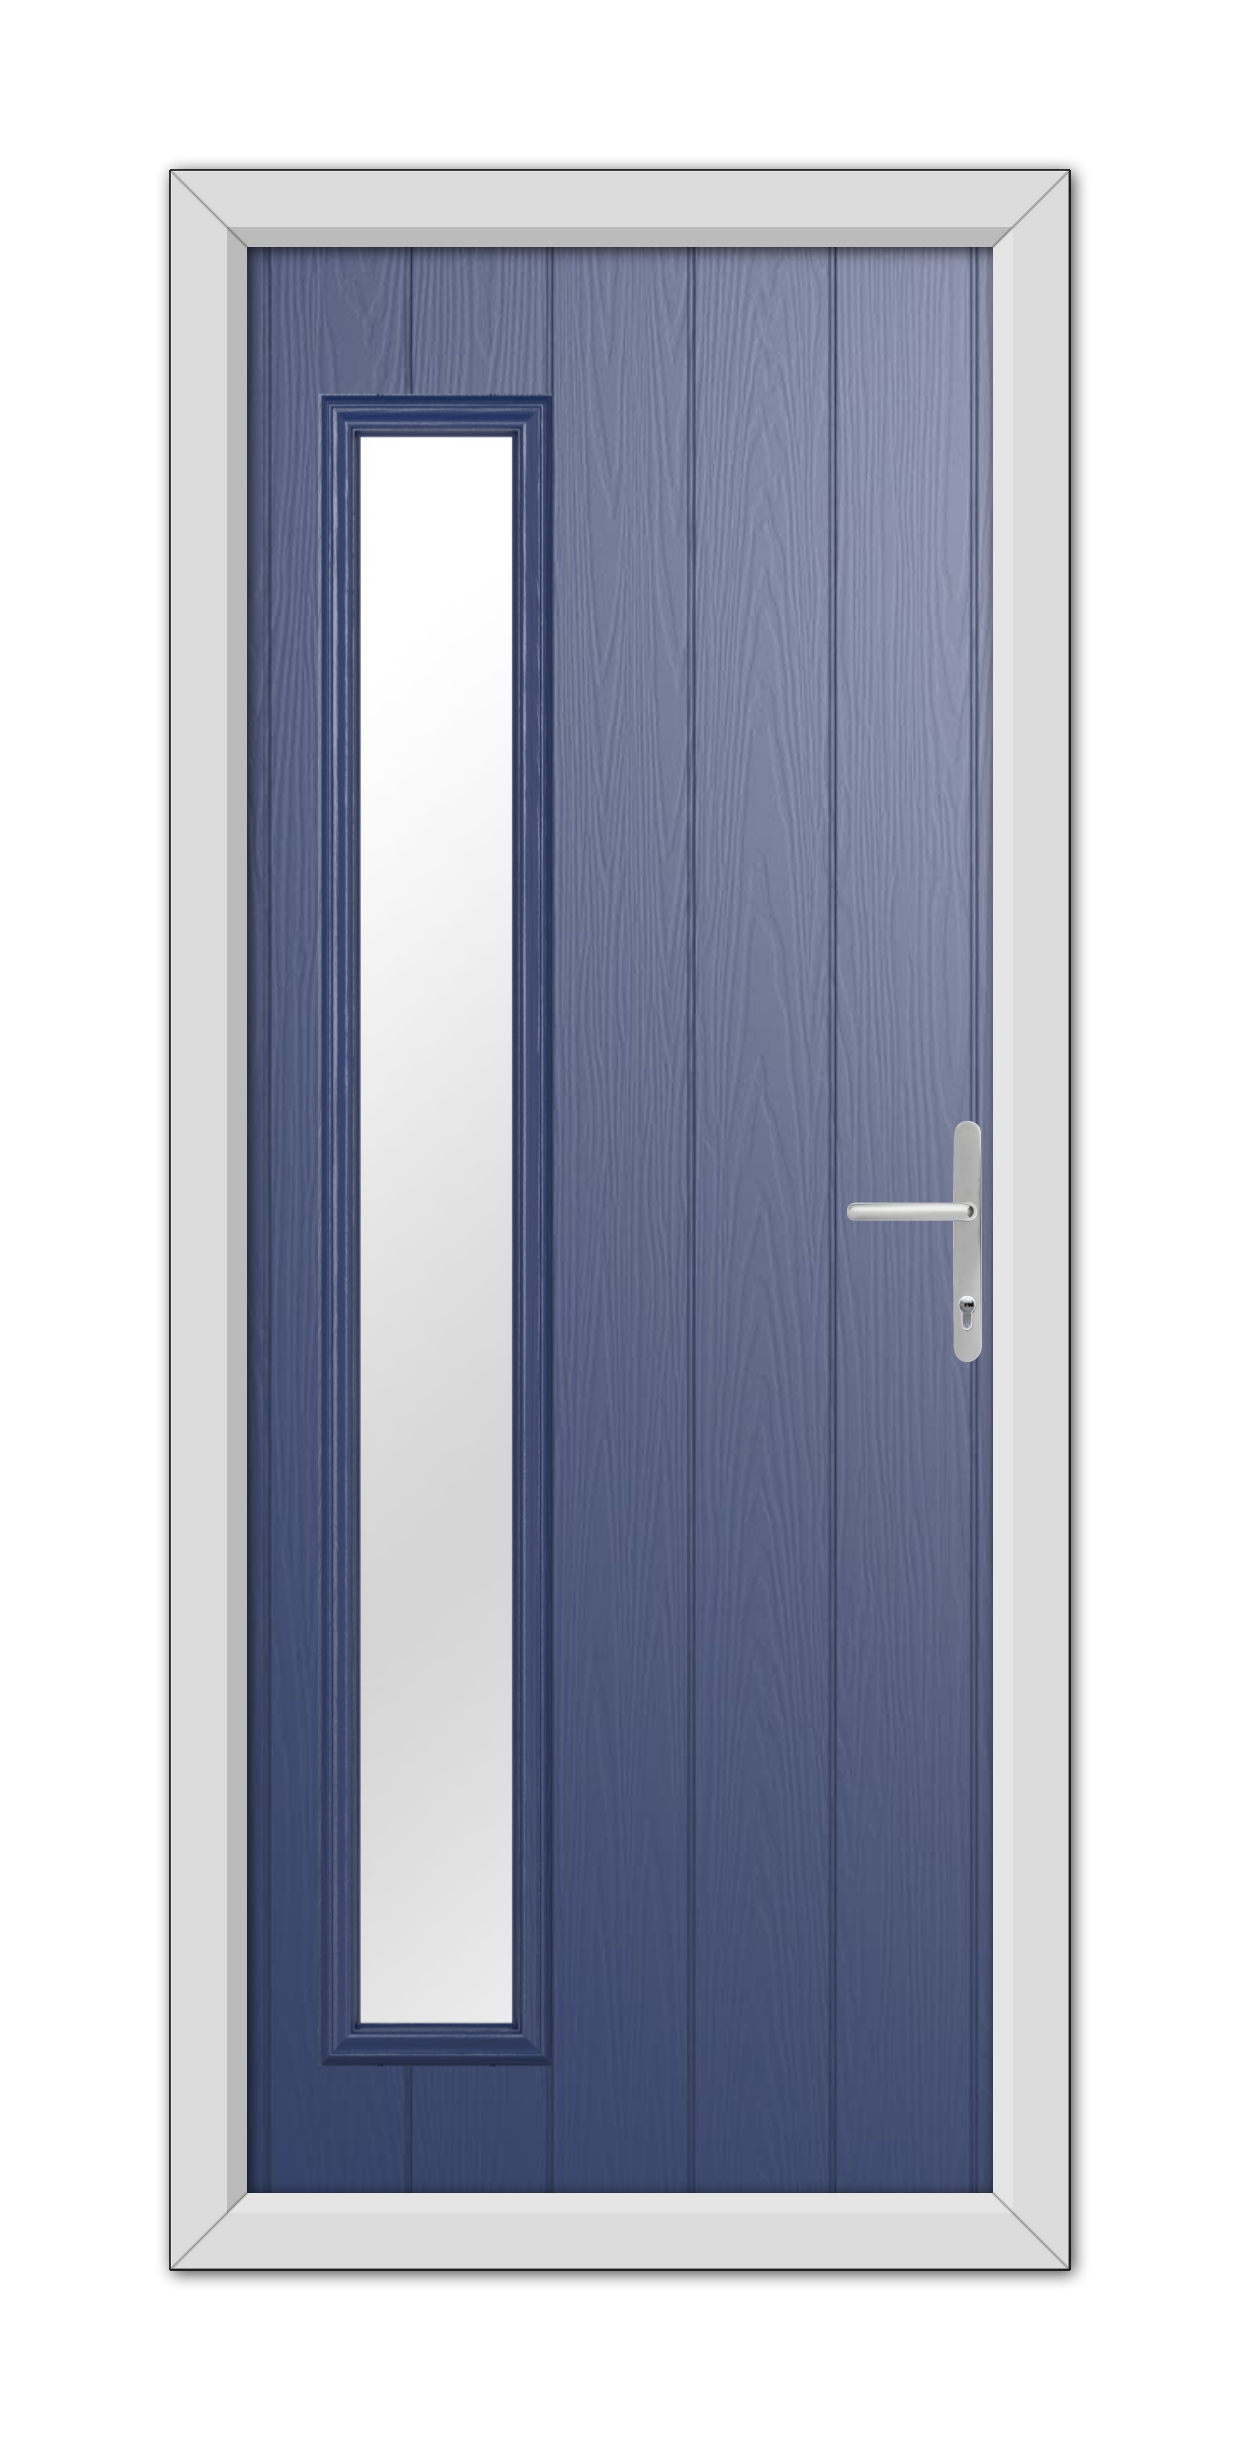 A Blue Sutherland Composite Door 48mm Timber Core with a vertical rectangular window and a silver handle, set within a white frame.